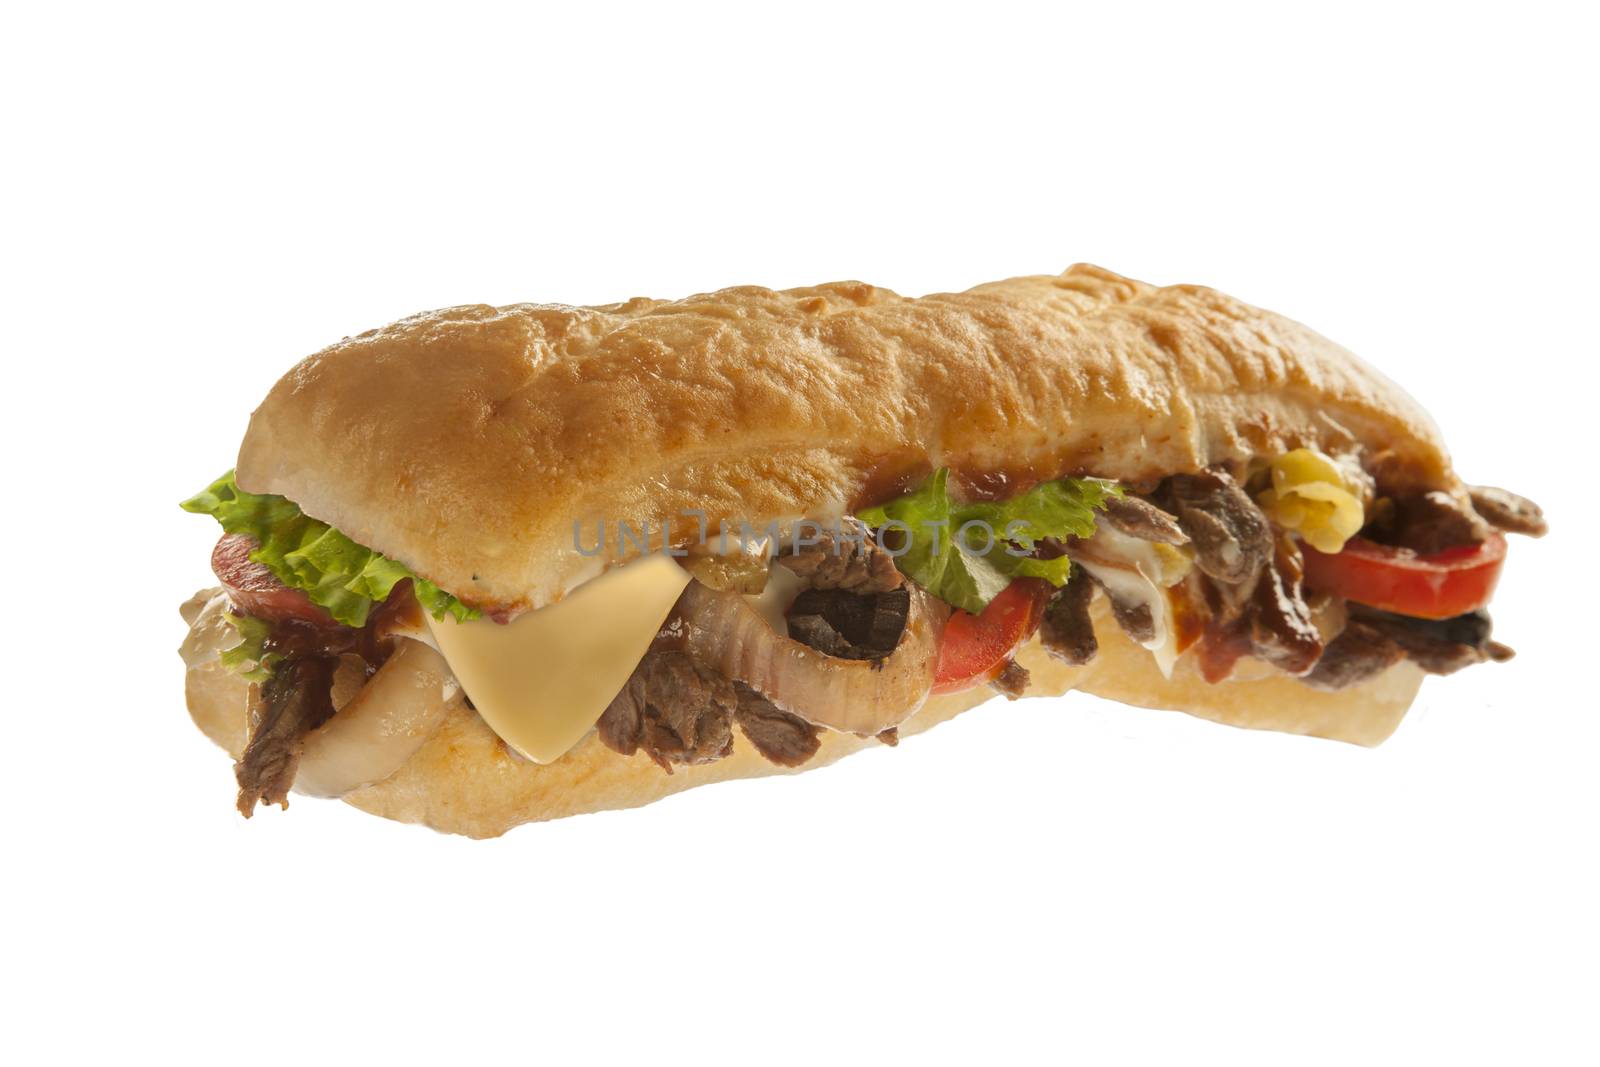 Sub Hoagie Sandwich with meat and veggies by haiderazim